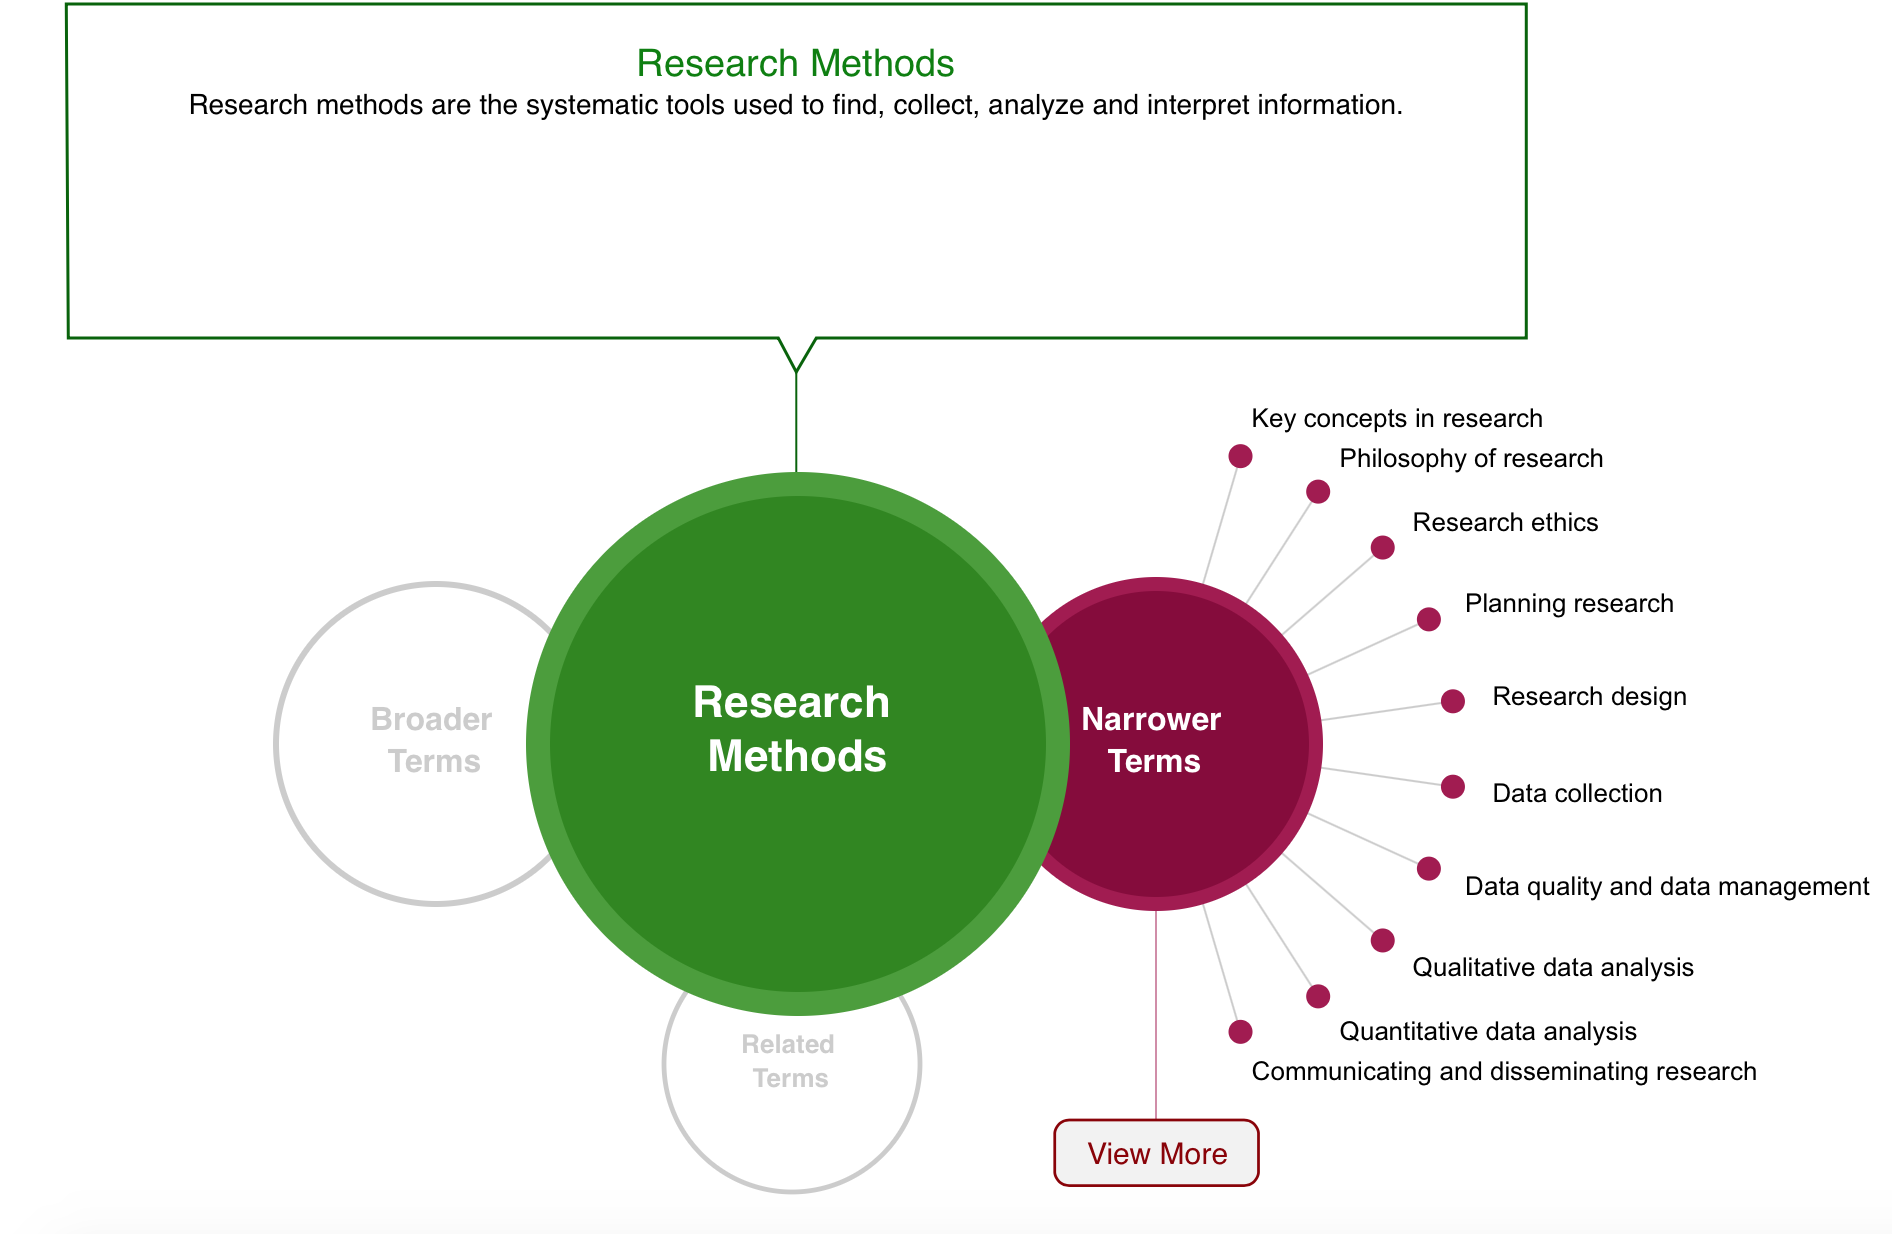 sage research methods thematic analysis